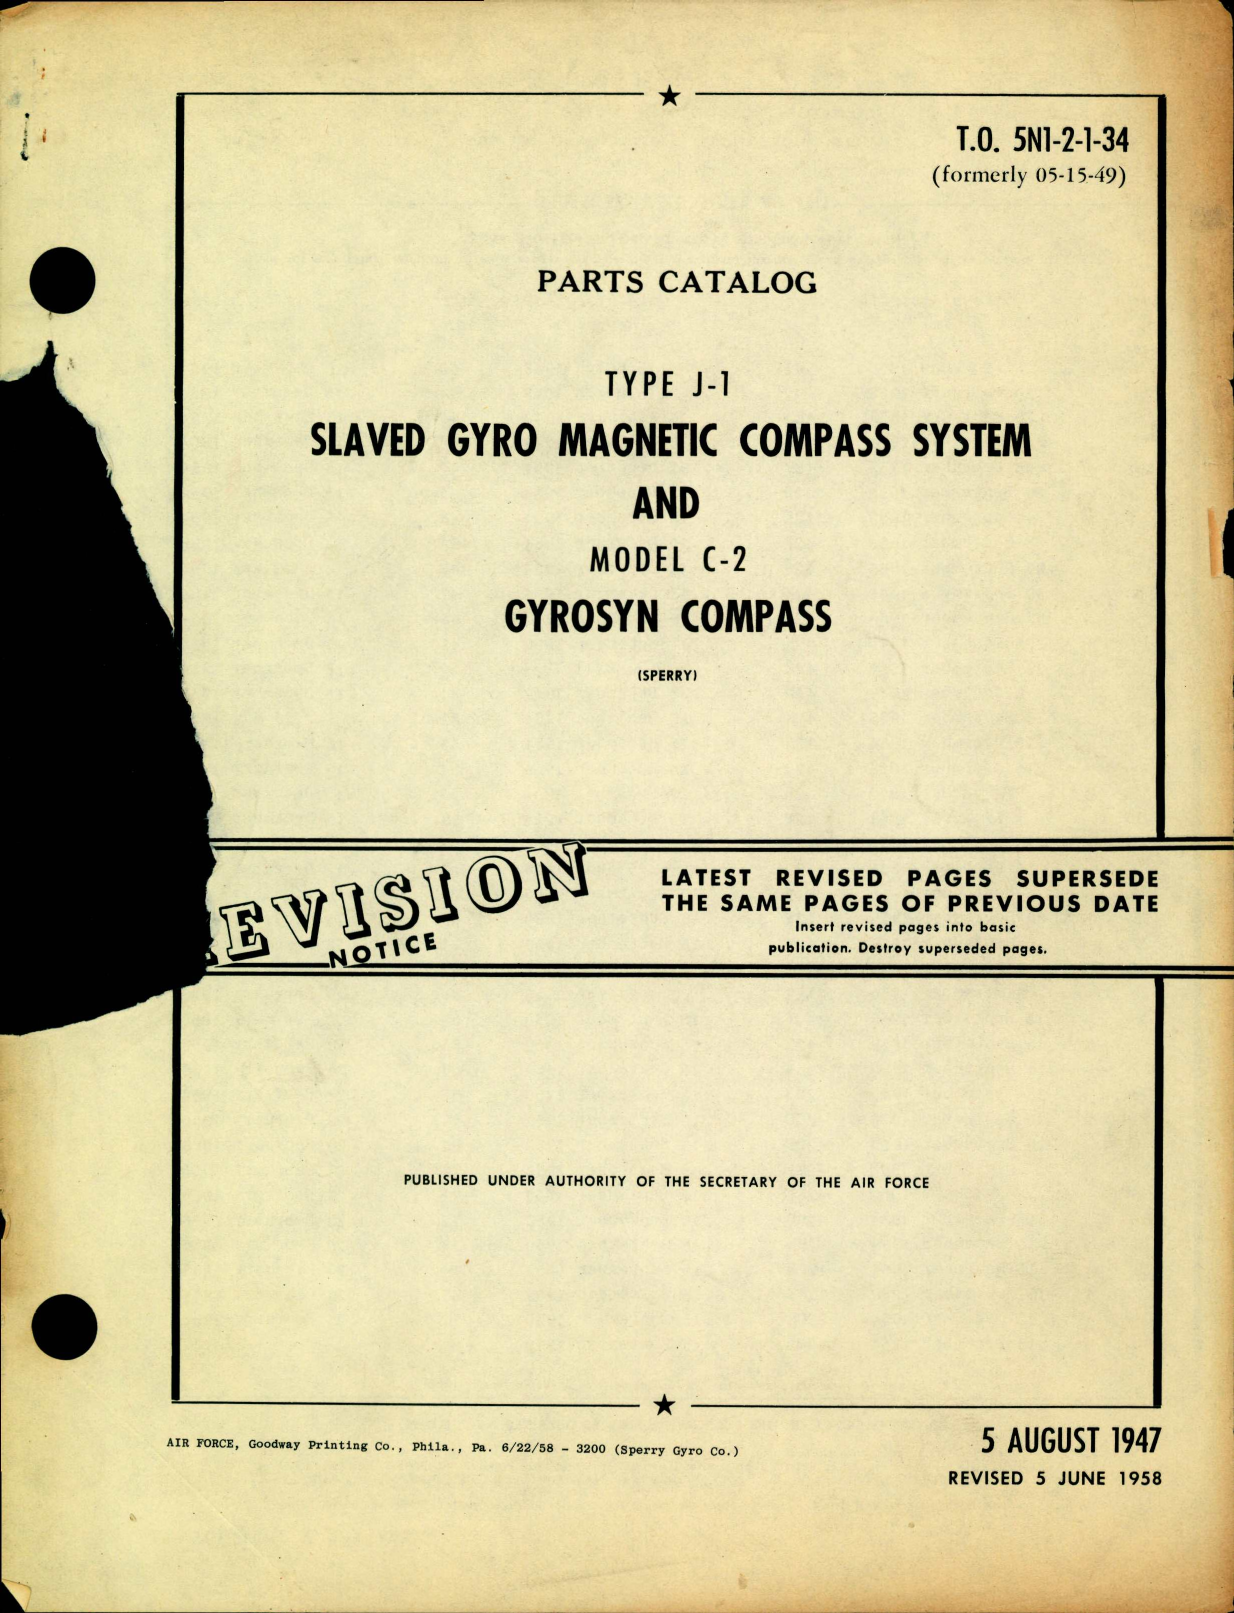 Sample page 1 from AirCorps Library document: Parts Catalog for Slaved Gyro Magnetic Compass System Type J-1, and Gyrosyn Compass Model C-2